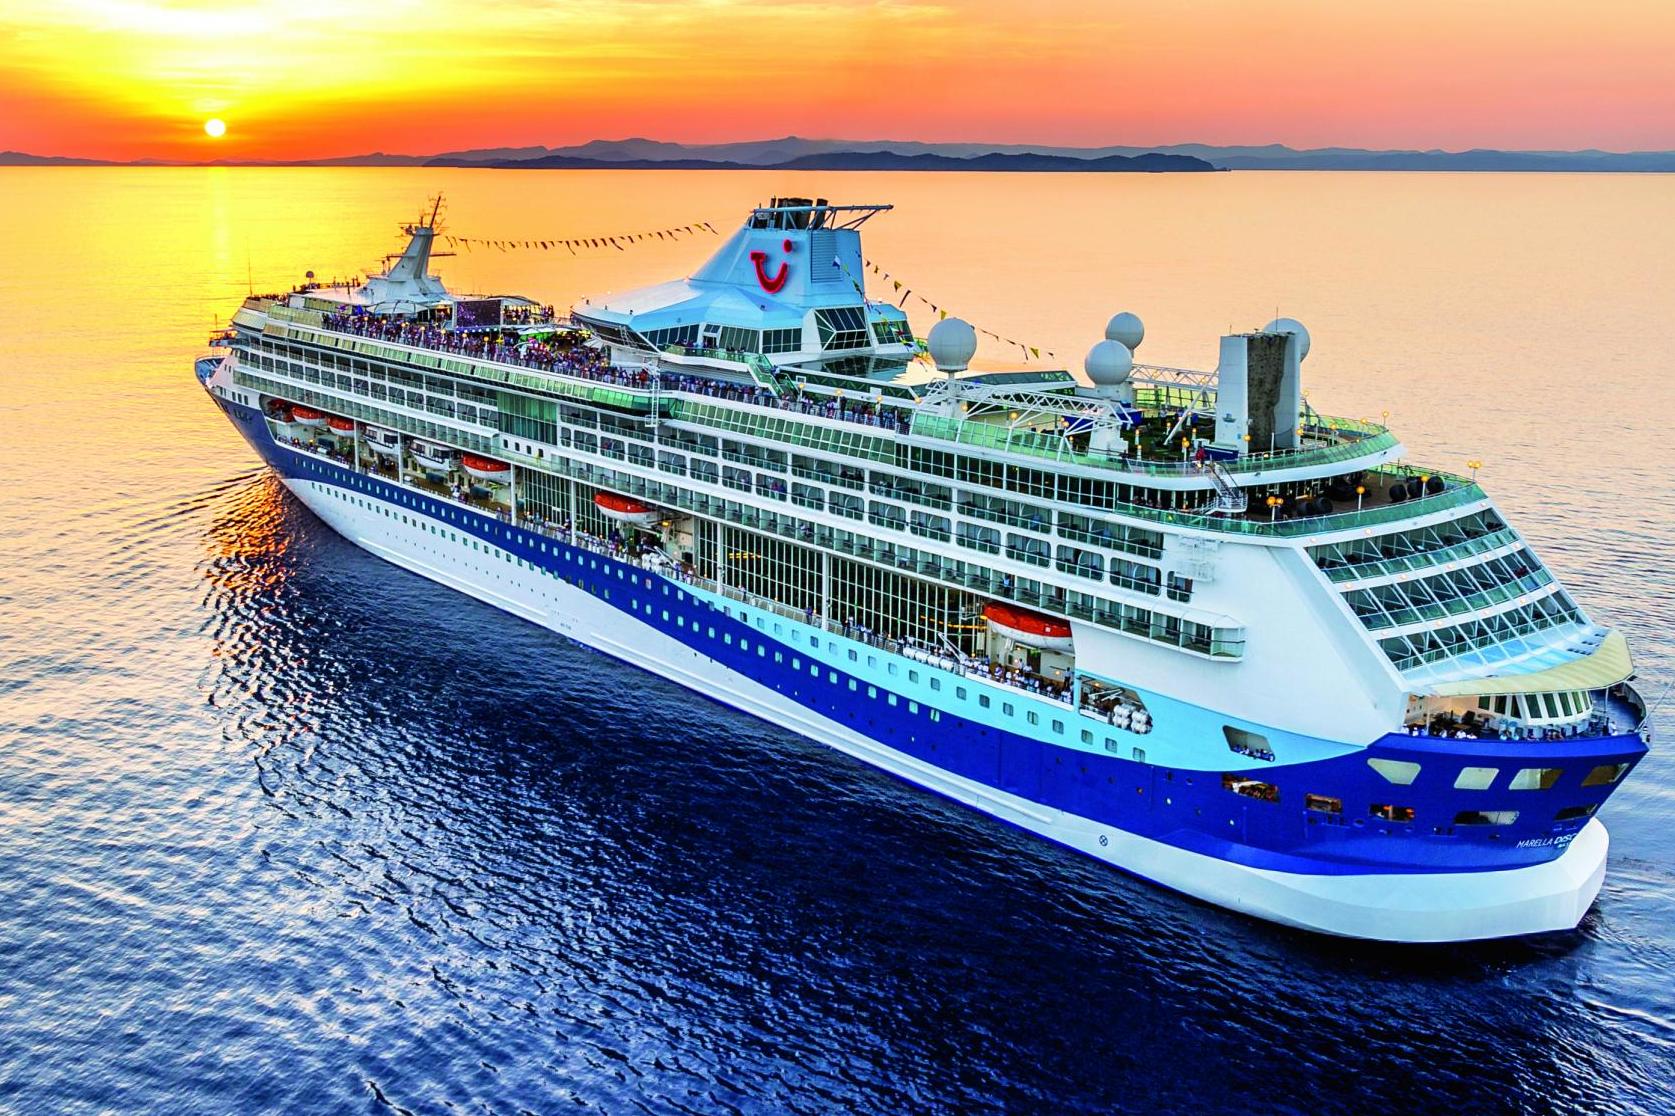 Full steam ahead: average rates on TUI's Marella cruises rose by £8 per night to £137